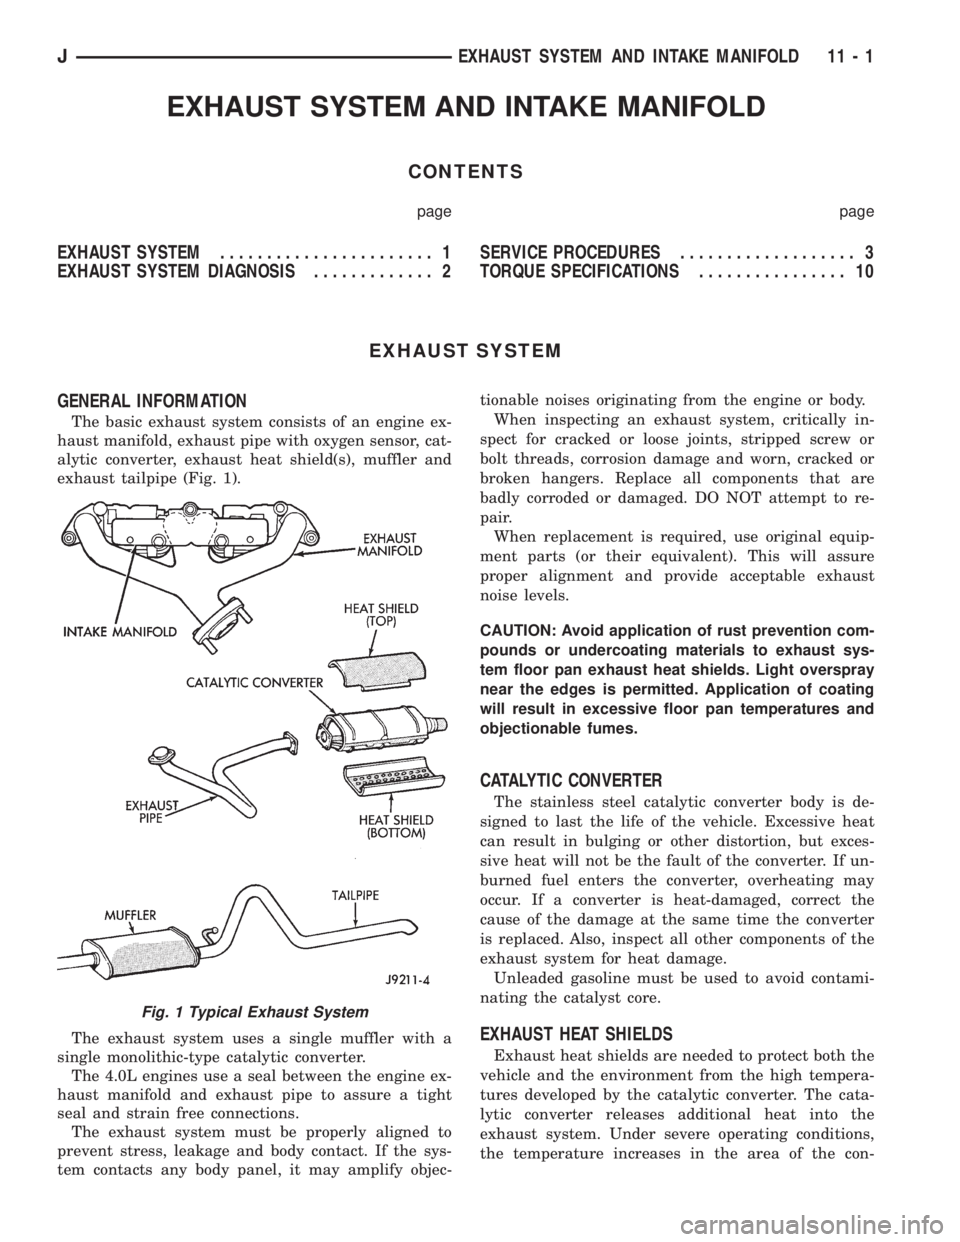 JEEP XJ 1995  Service And Repair Manual EXHAUST SYSTEM AND INTAKE MANIFOLD
CONTENTS
page page
EXHAUST SYSTEM....................... 1
EXHAUST SYSTEM DIAGNOSIS............. 2SERVICE PROCEDURES................... 3
TORQUE SPECIFICATIONS......